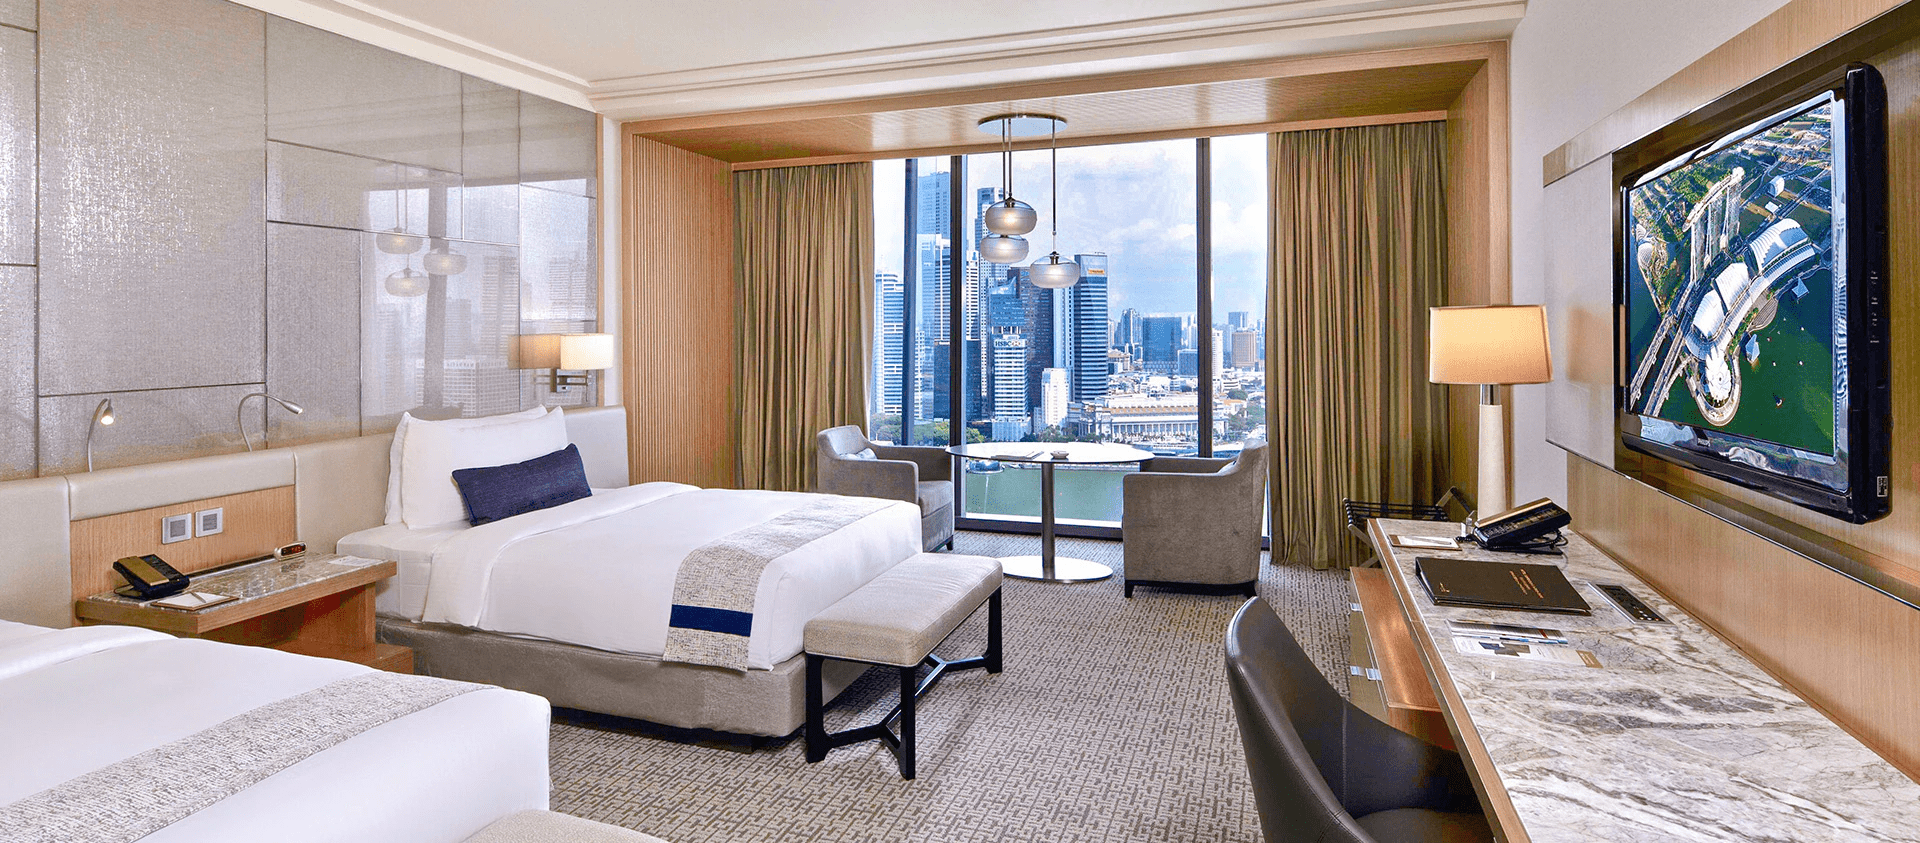 Singapore Hotels With Best F1 Views - parkroyal collection marina bay